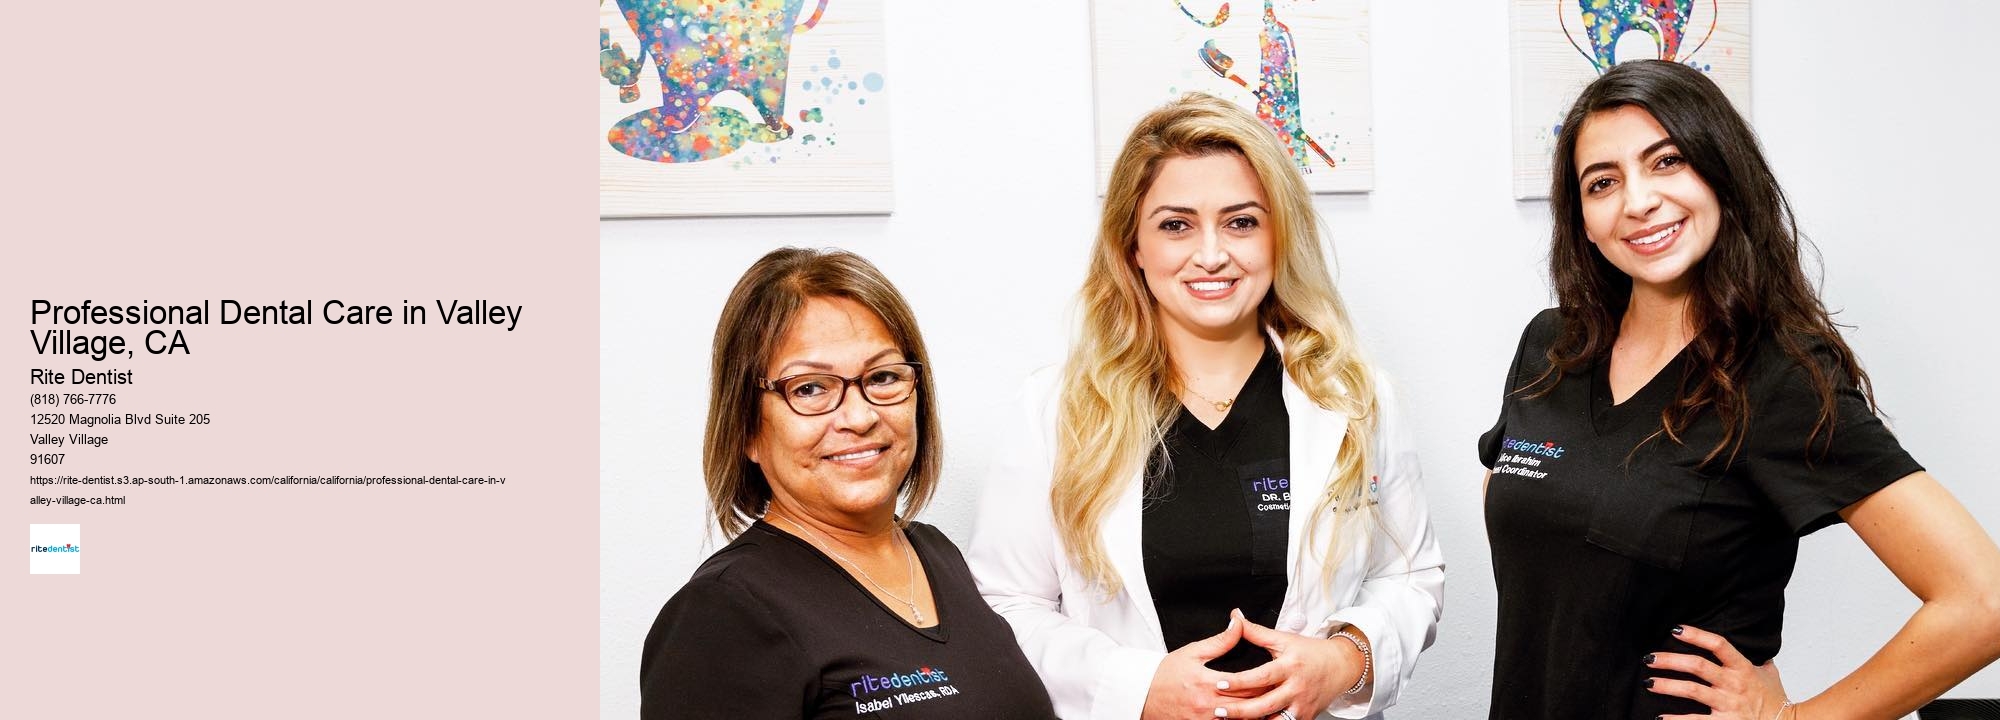 Professional Dental Care in Valley Village, CA